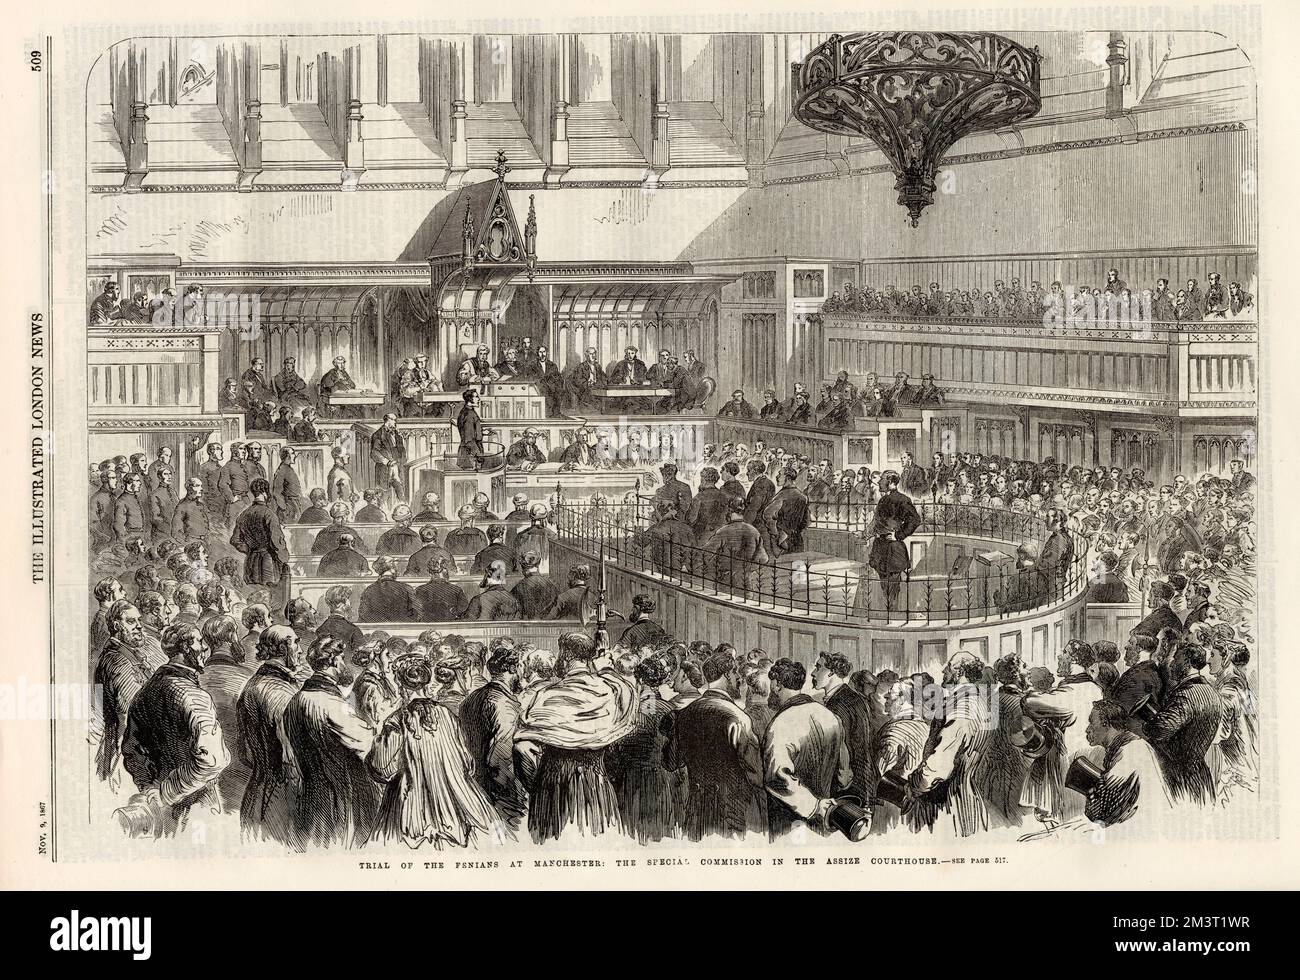 Trial of the Fenians at Manchester: the Special Commission in the Assize courthouse. Fenian prisoners - W. O'Meara Allen, Michael Larkin, William Gould, Thomas Maguire and Edward Shore - charged with the murder of Police Sergeant Brett and the attack on the police van for the purpose of rescuing Kelly and Deasey at Manchester on 18th September 1867. Stock Photo